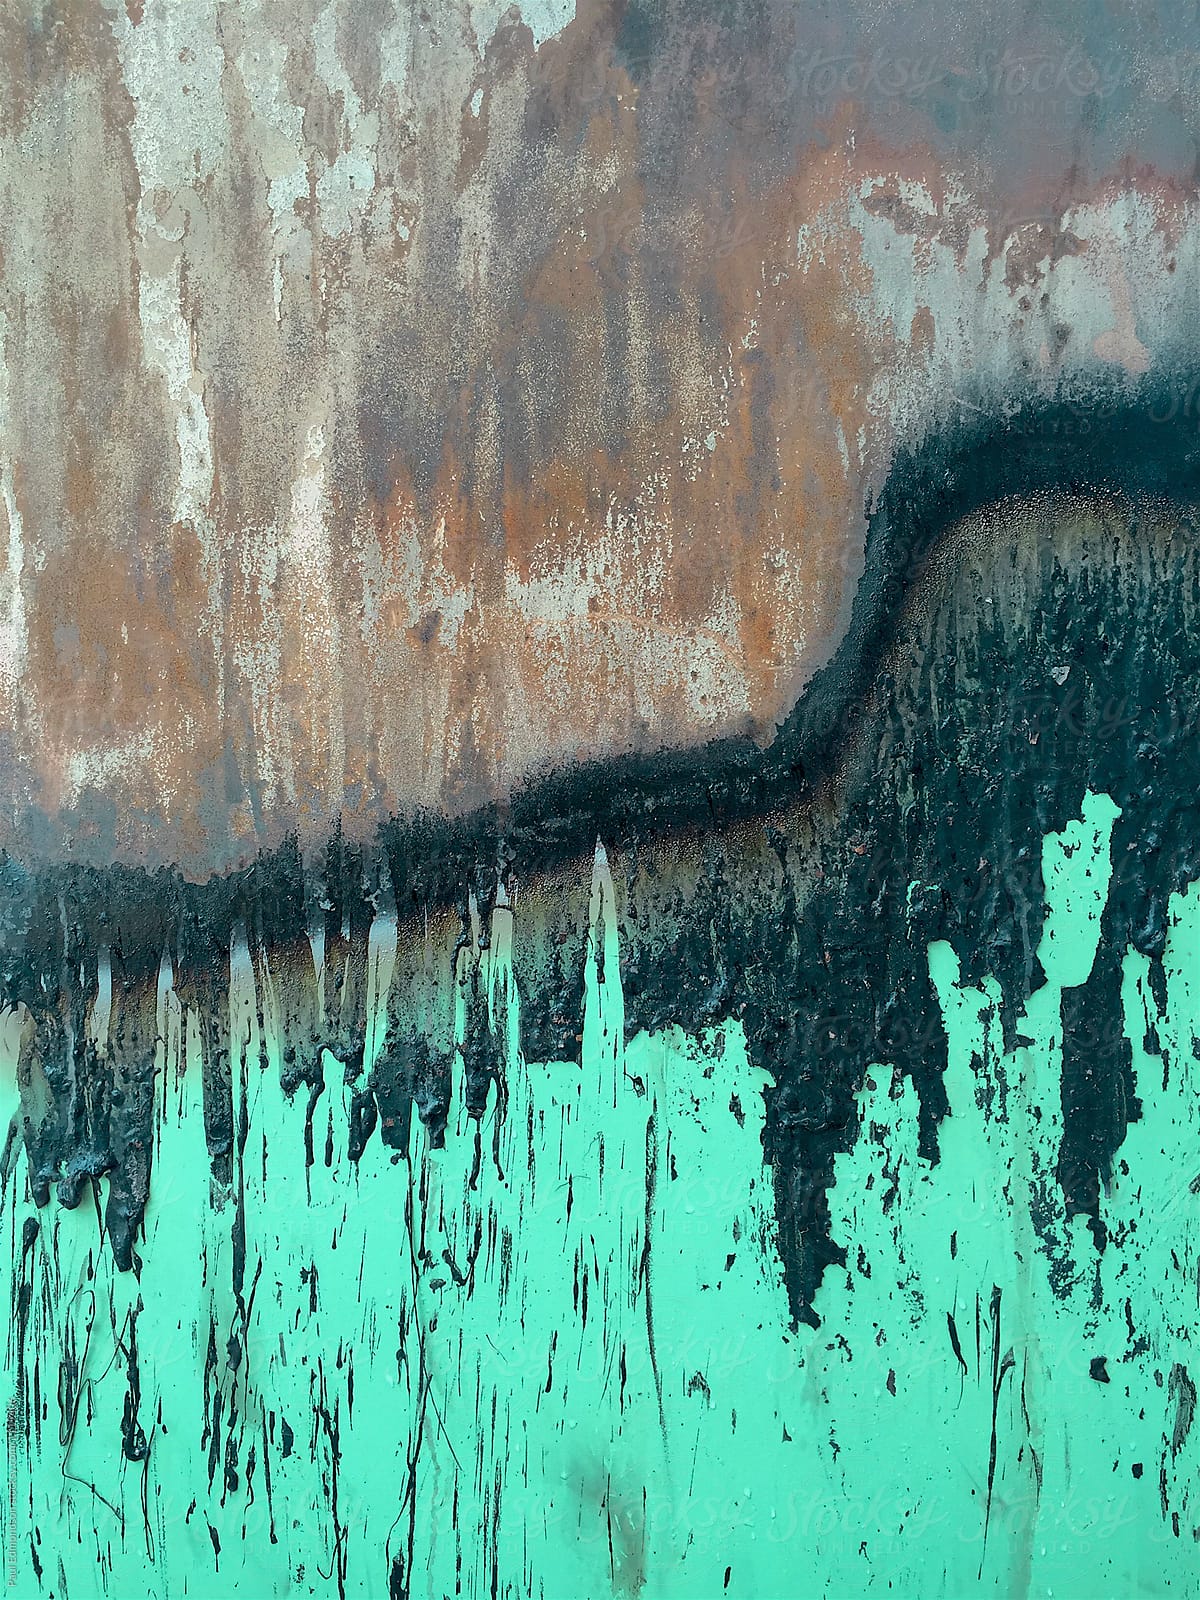 Close up of dripping toxic sludge on rusty, metal trash canister